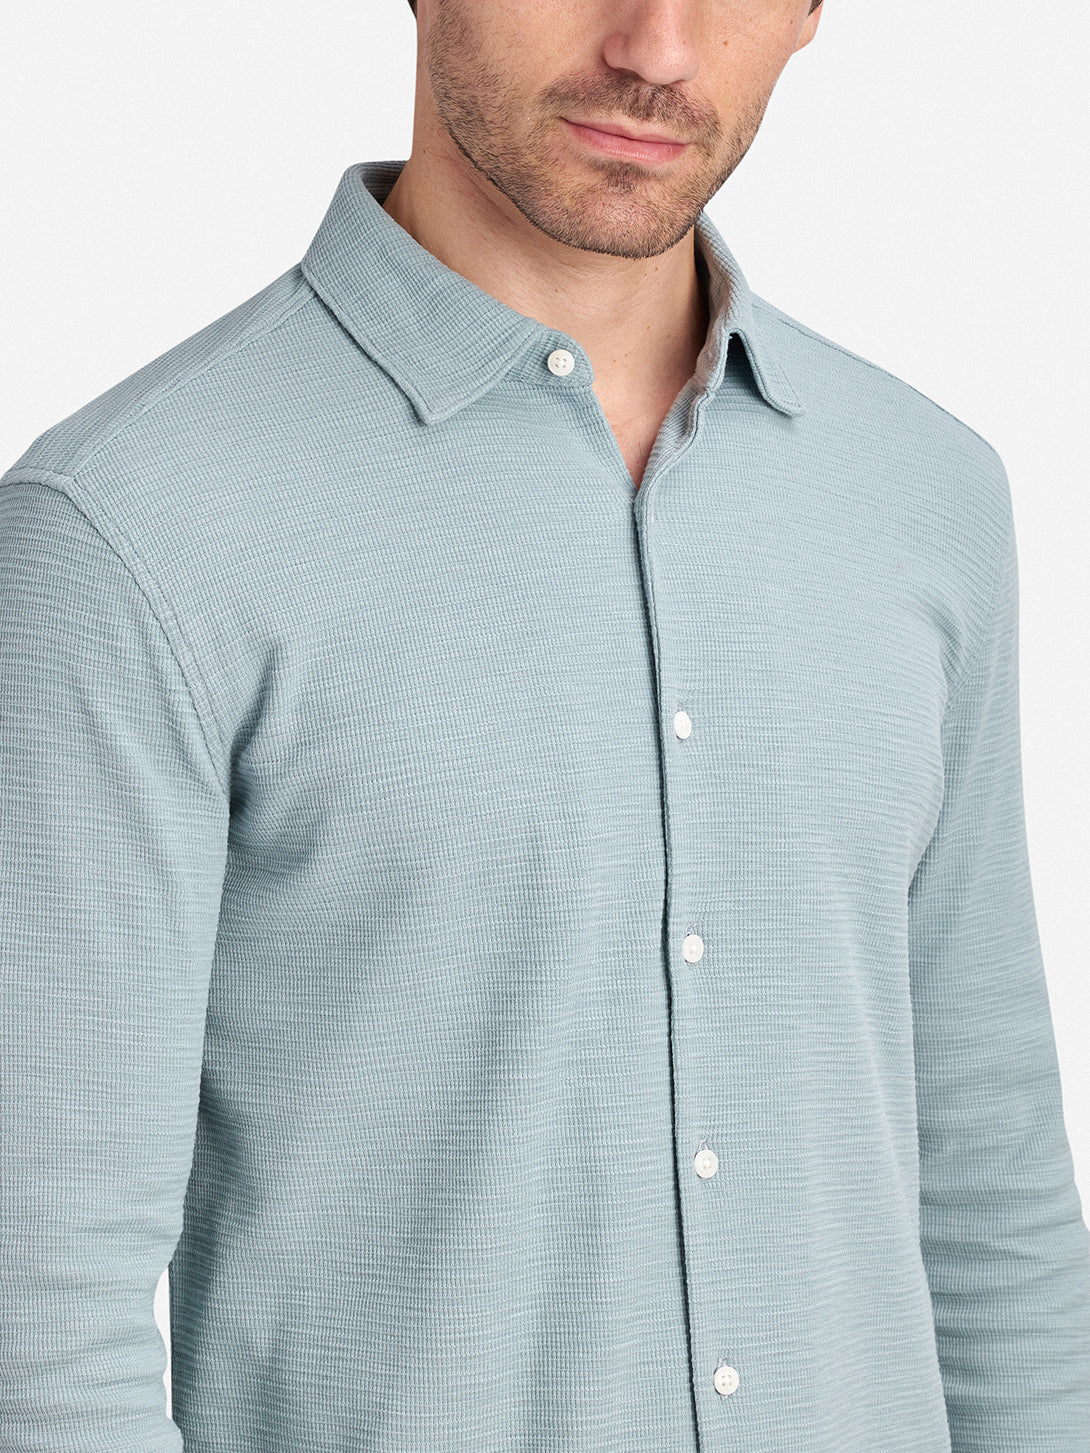 Tradewinds Darcy Knit Men's O.N.S Button Up Shirt